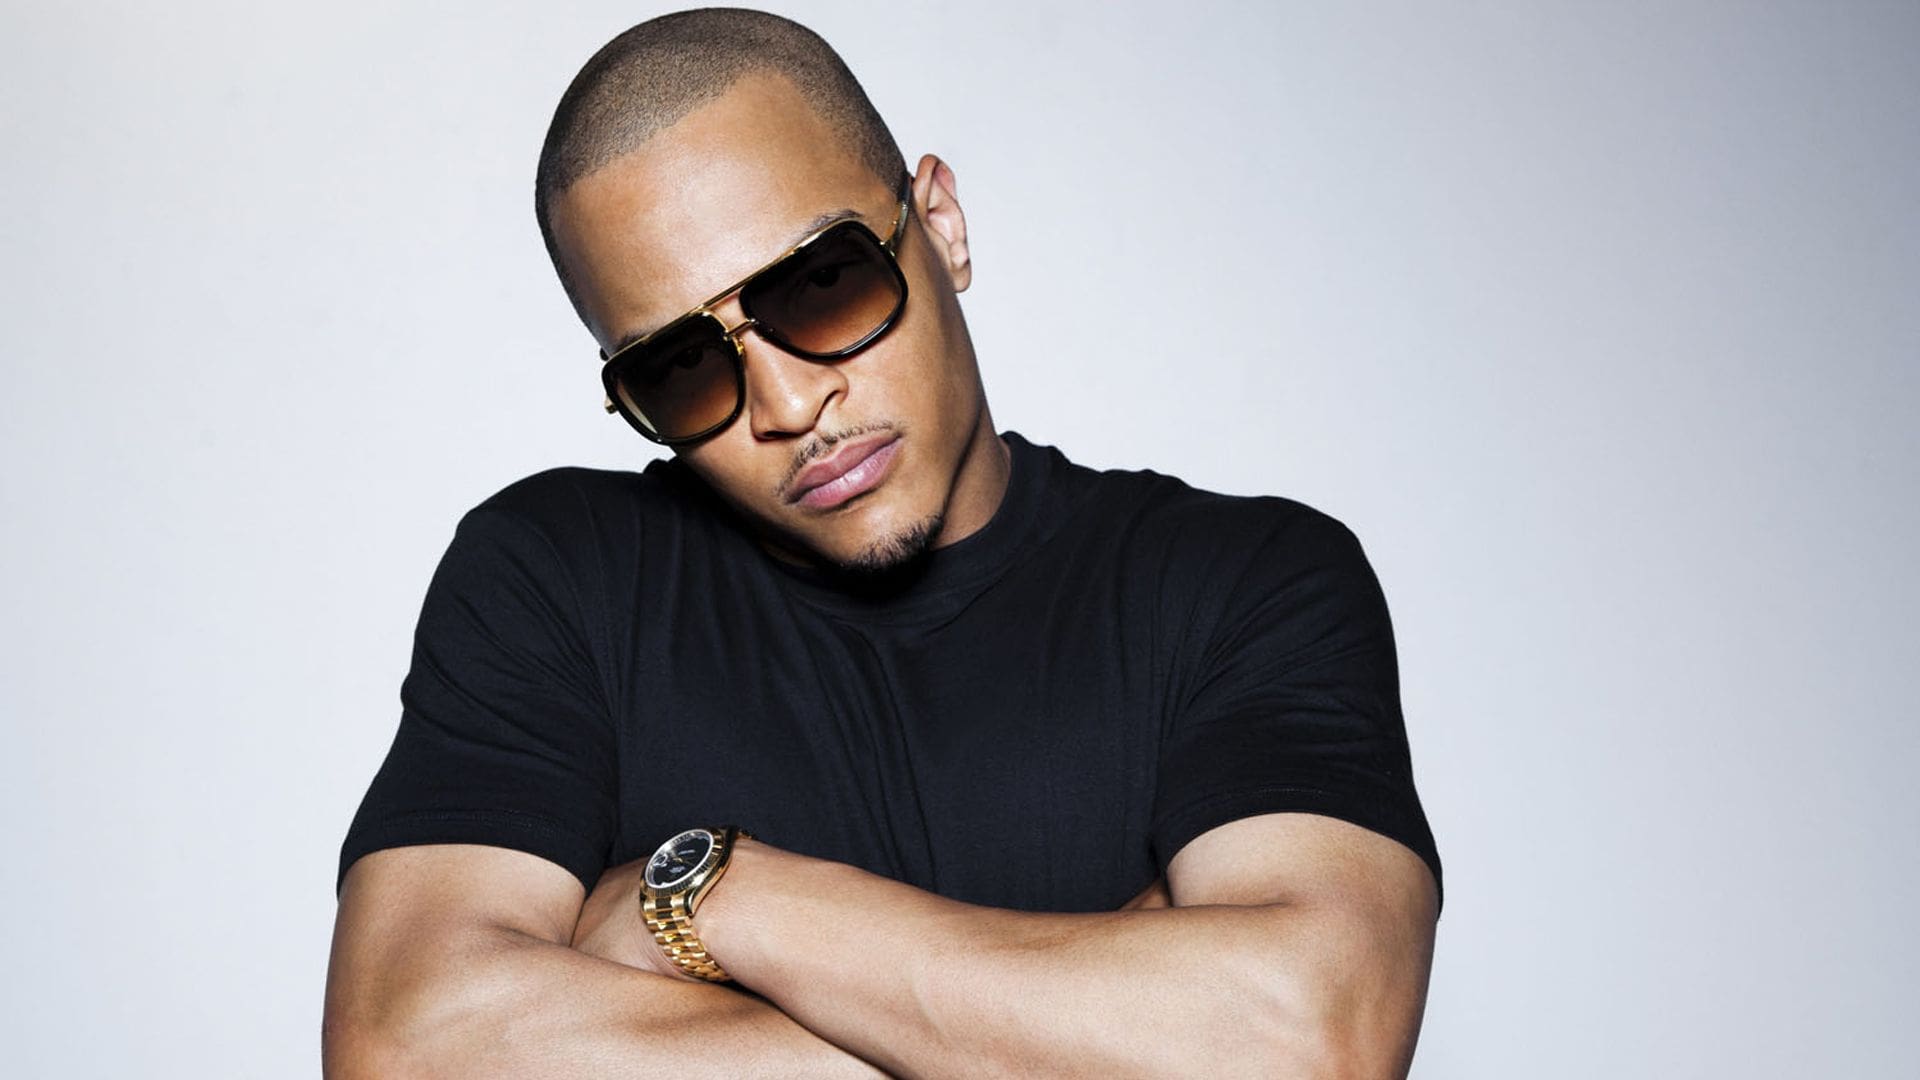 T.I. Celebrates The King Of Many Generations - Check Out The Emotional Post He Shared